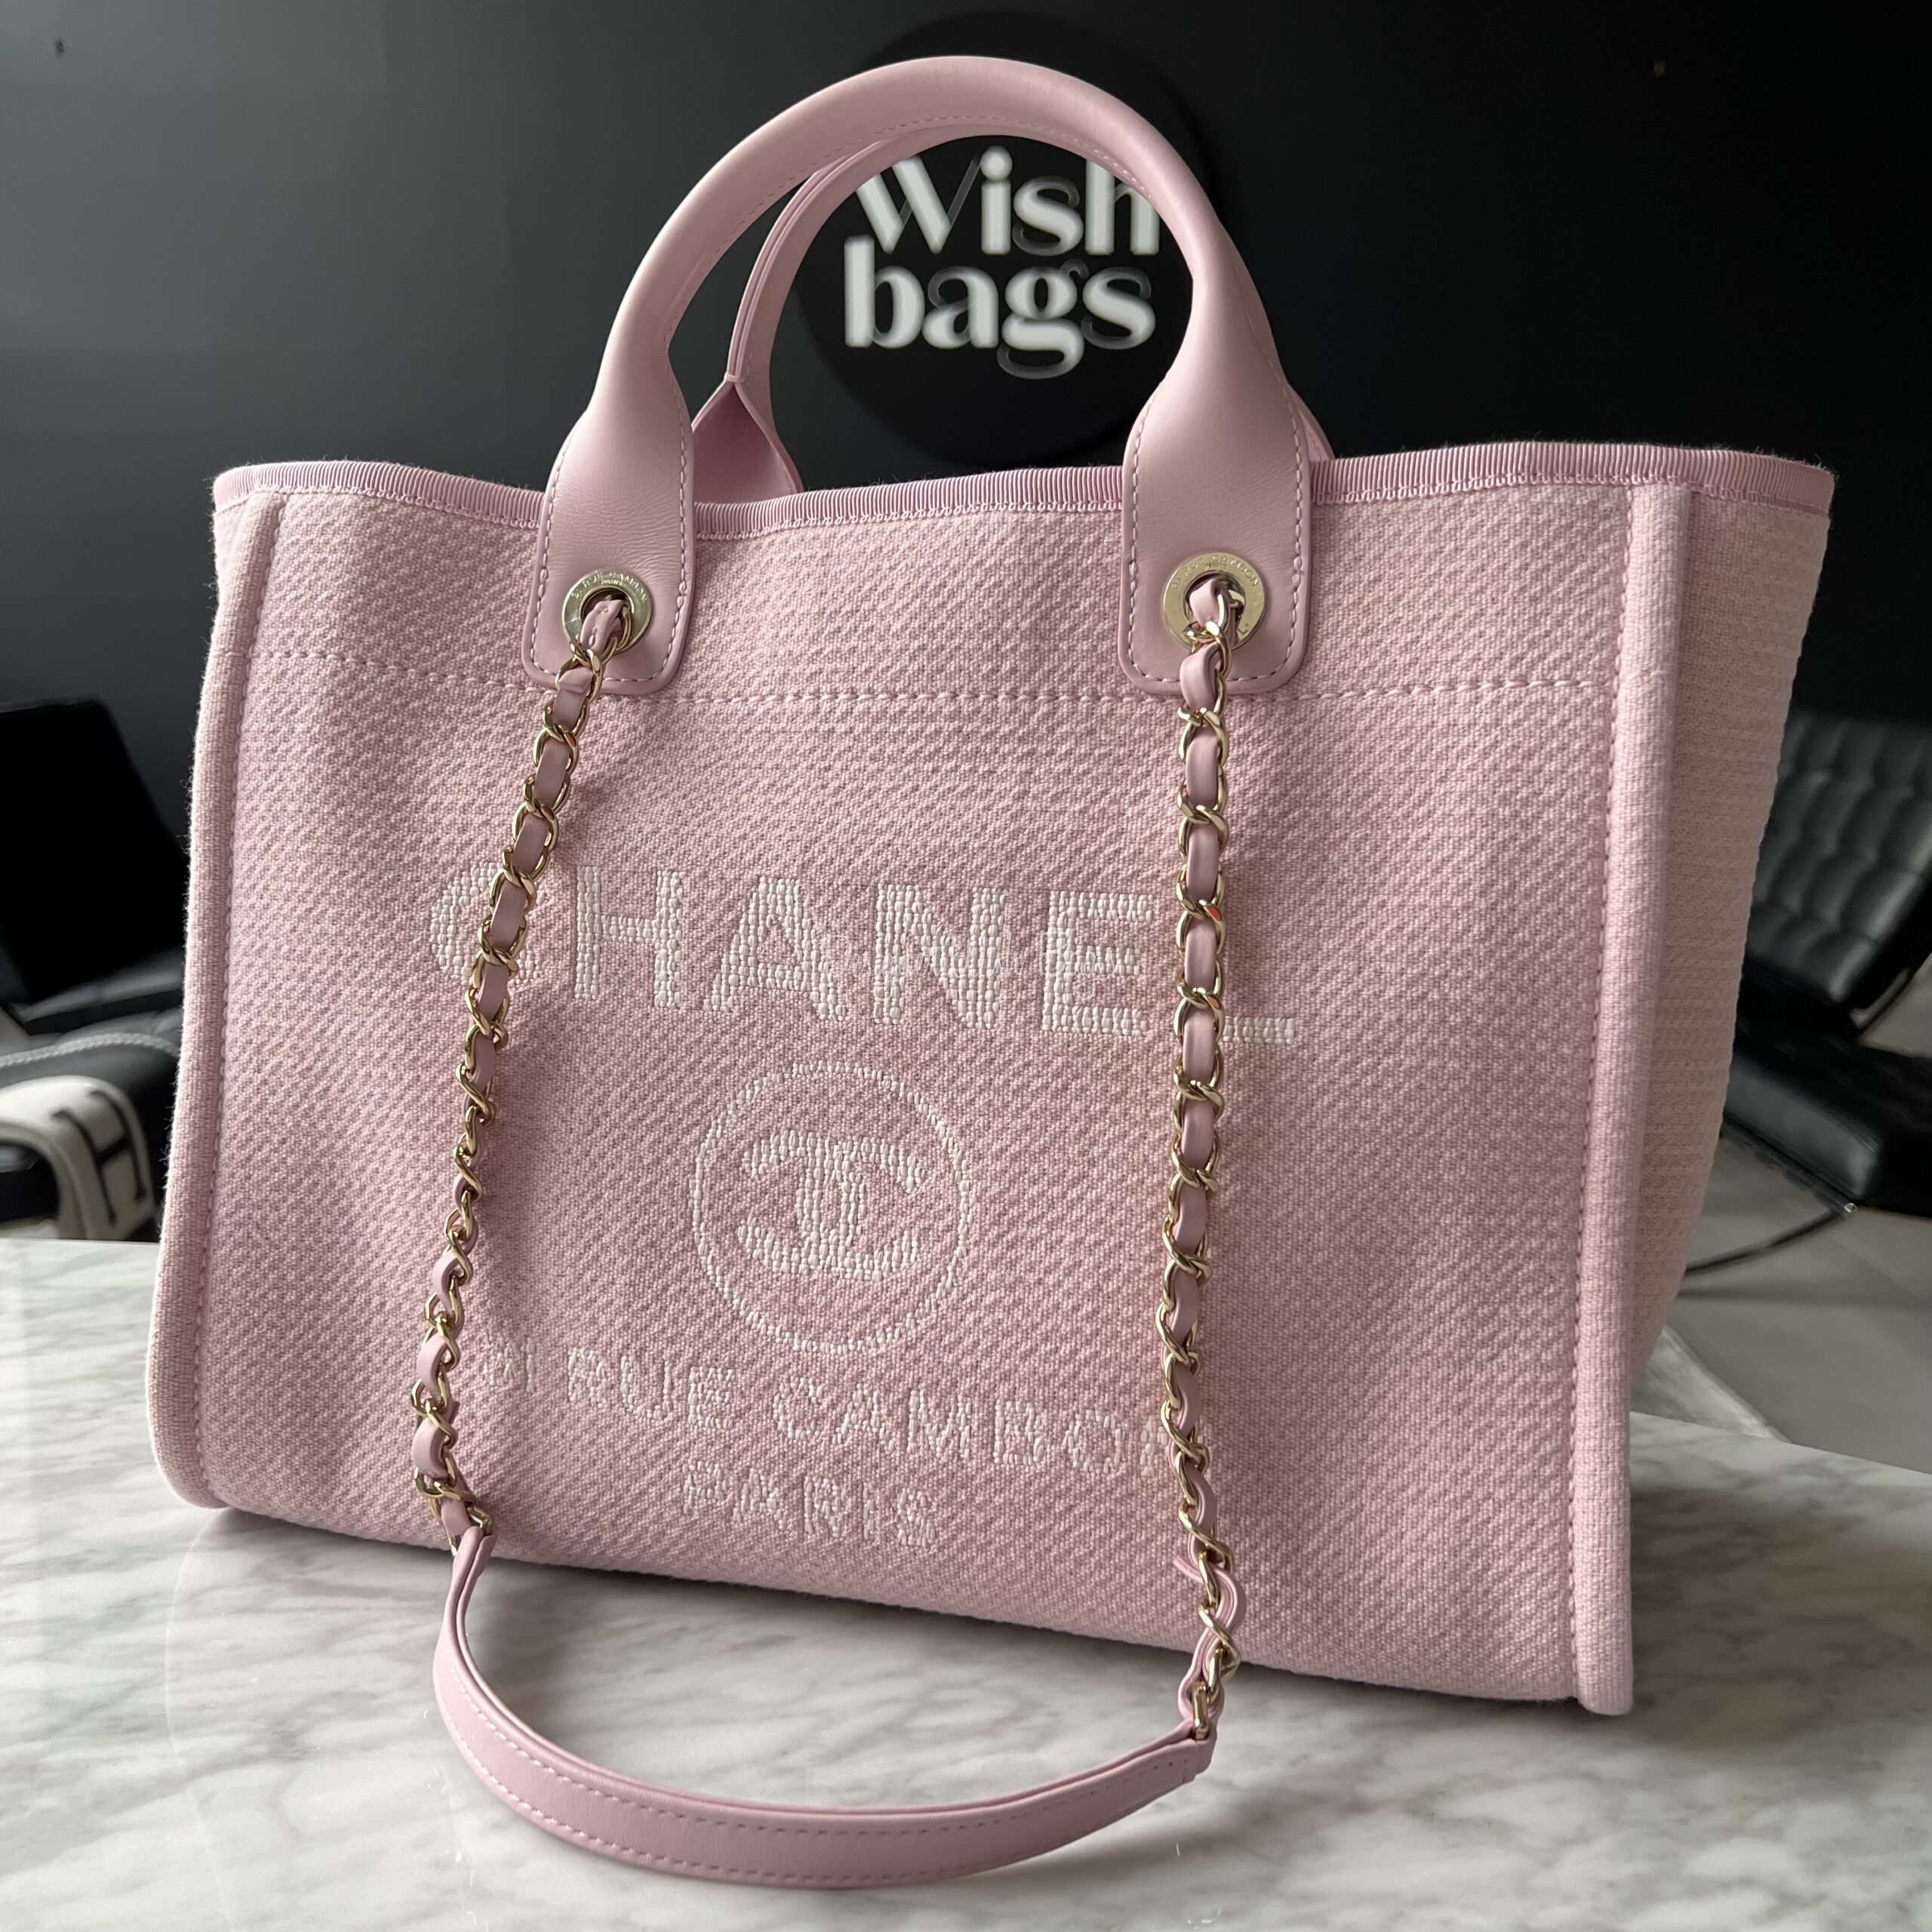 Chanel Small Deauville Pink - Designer WishBags